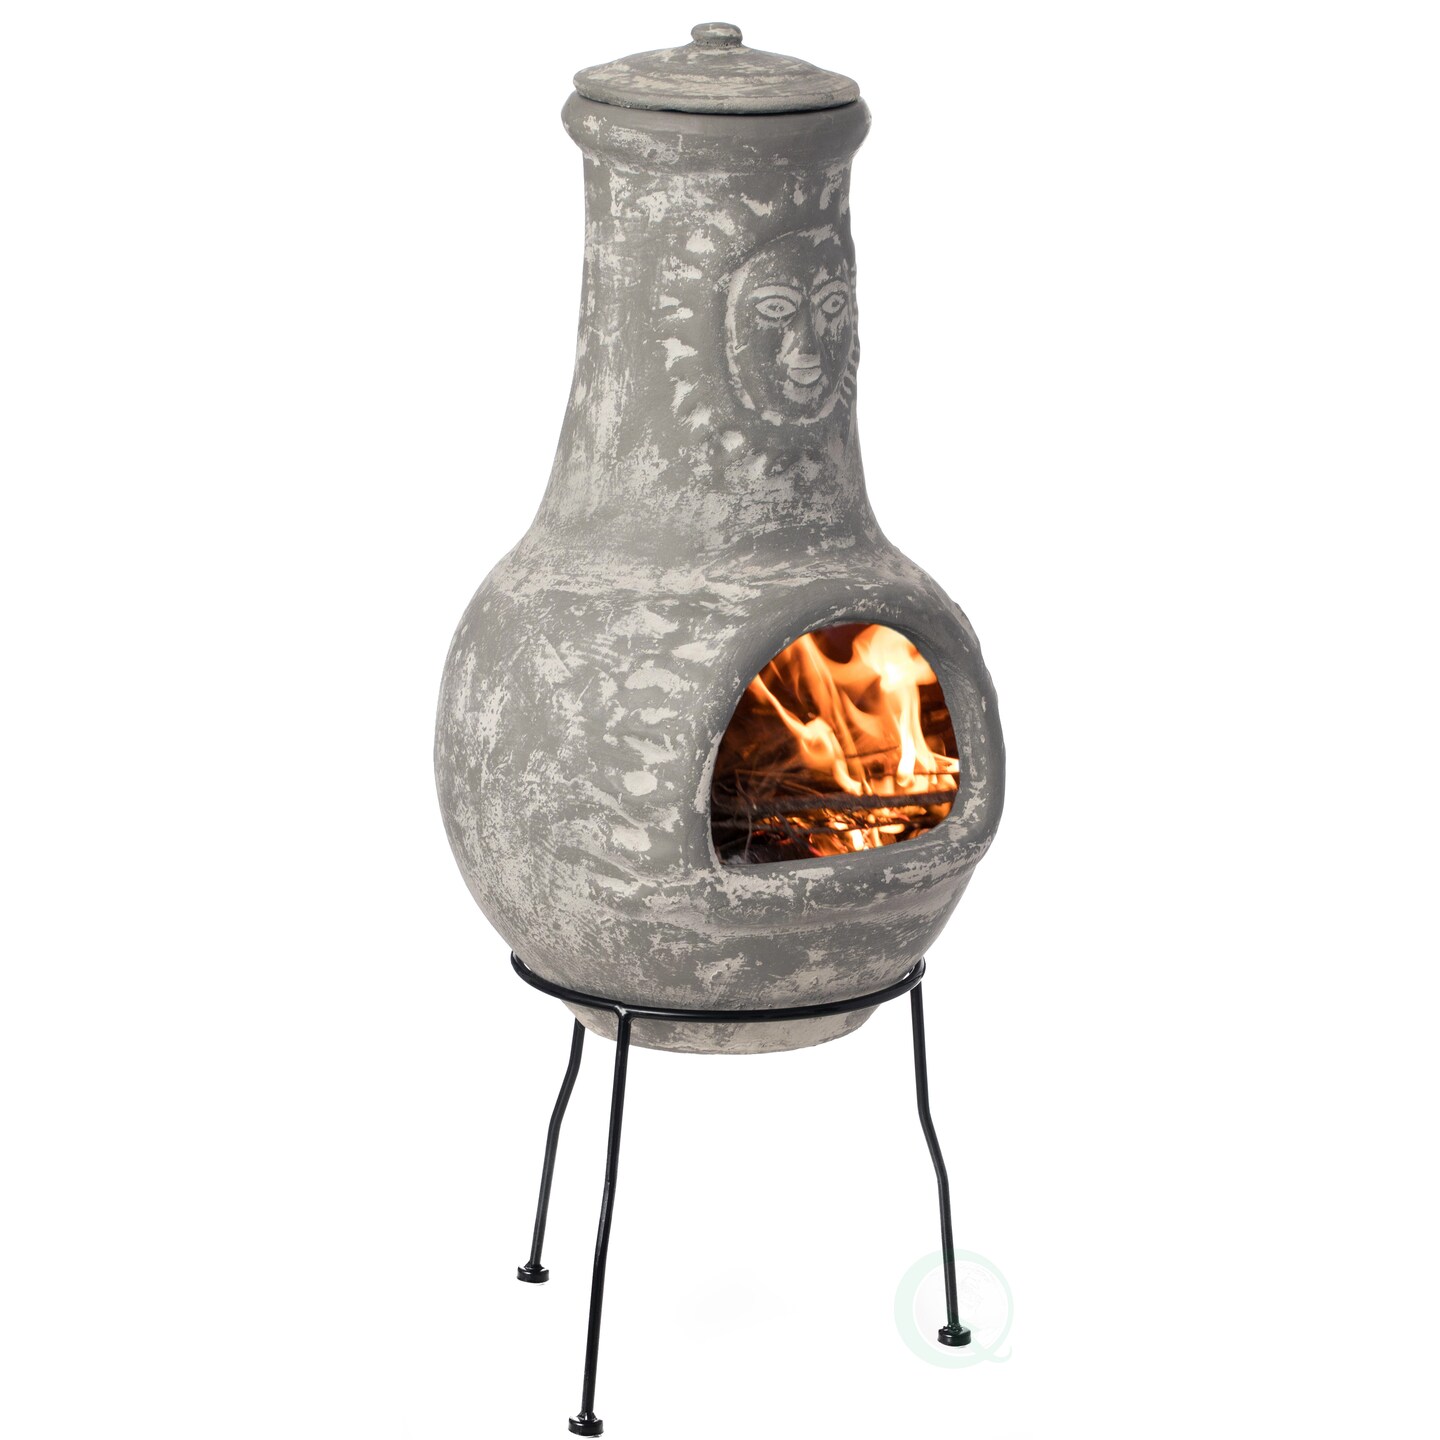 Vintiquewise Outdoor Clay Chiminea Fireplace Sun Design Wood Burning Fire Pit with Sturdy Metal Stand Barbecue Cocktail Party Cozy